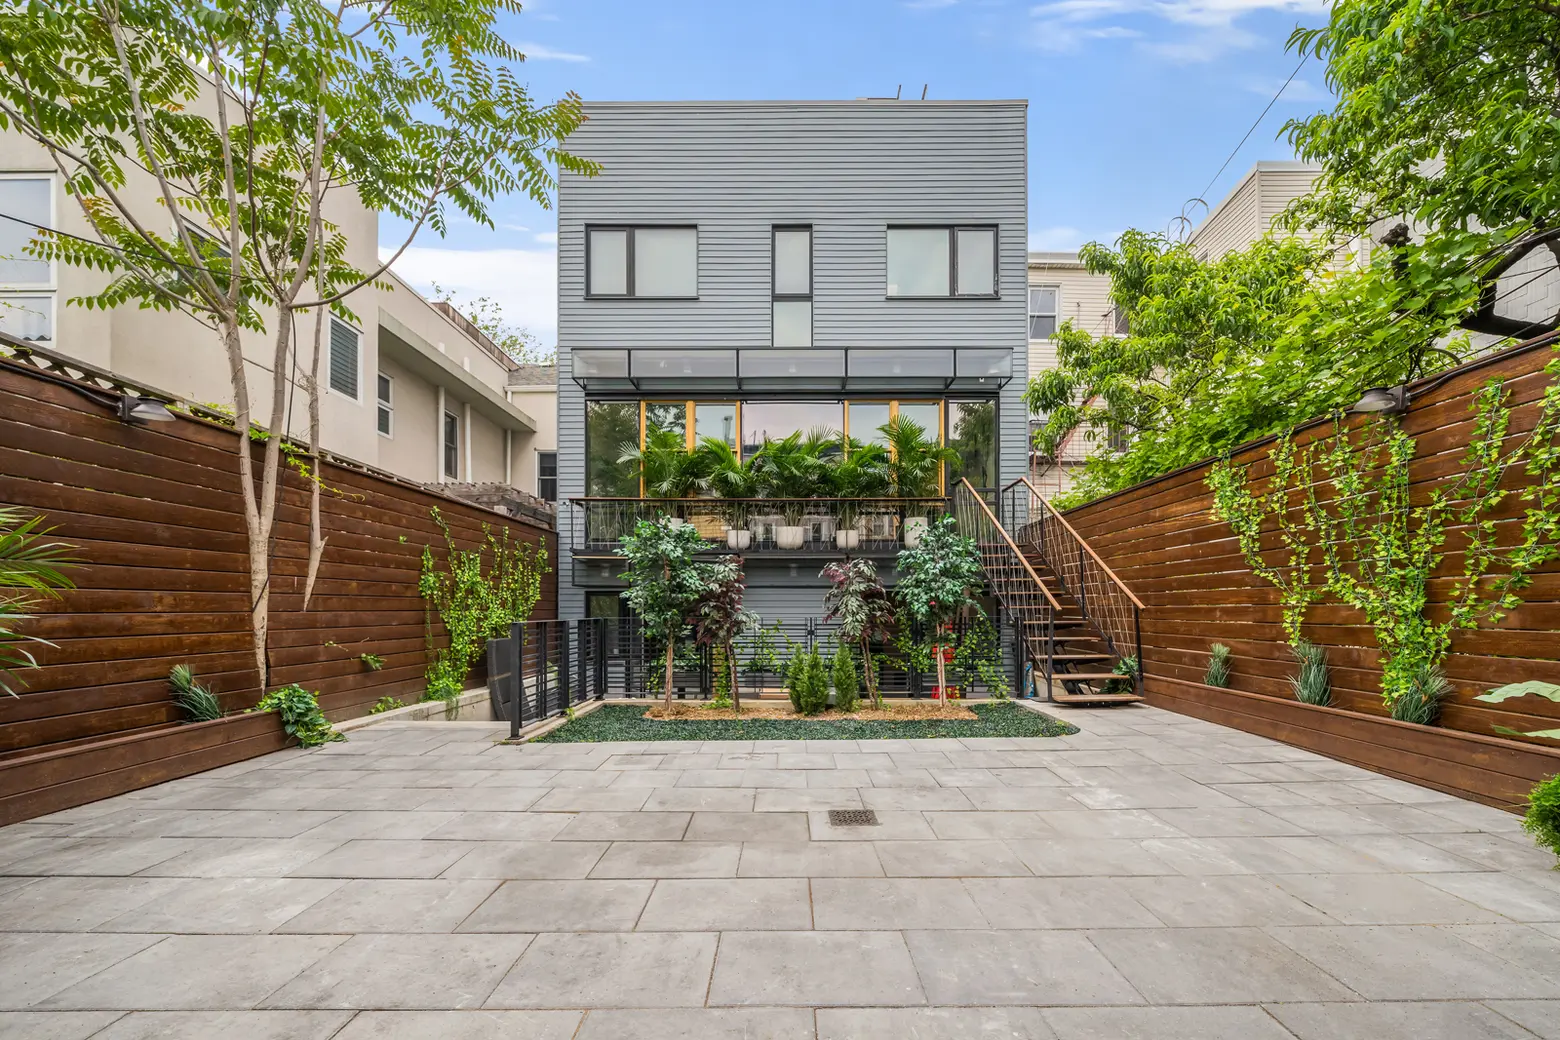 For $5.2M, this Williamsburg townhouse comes with a charming carriage house and lots of outdoor space